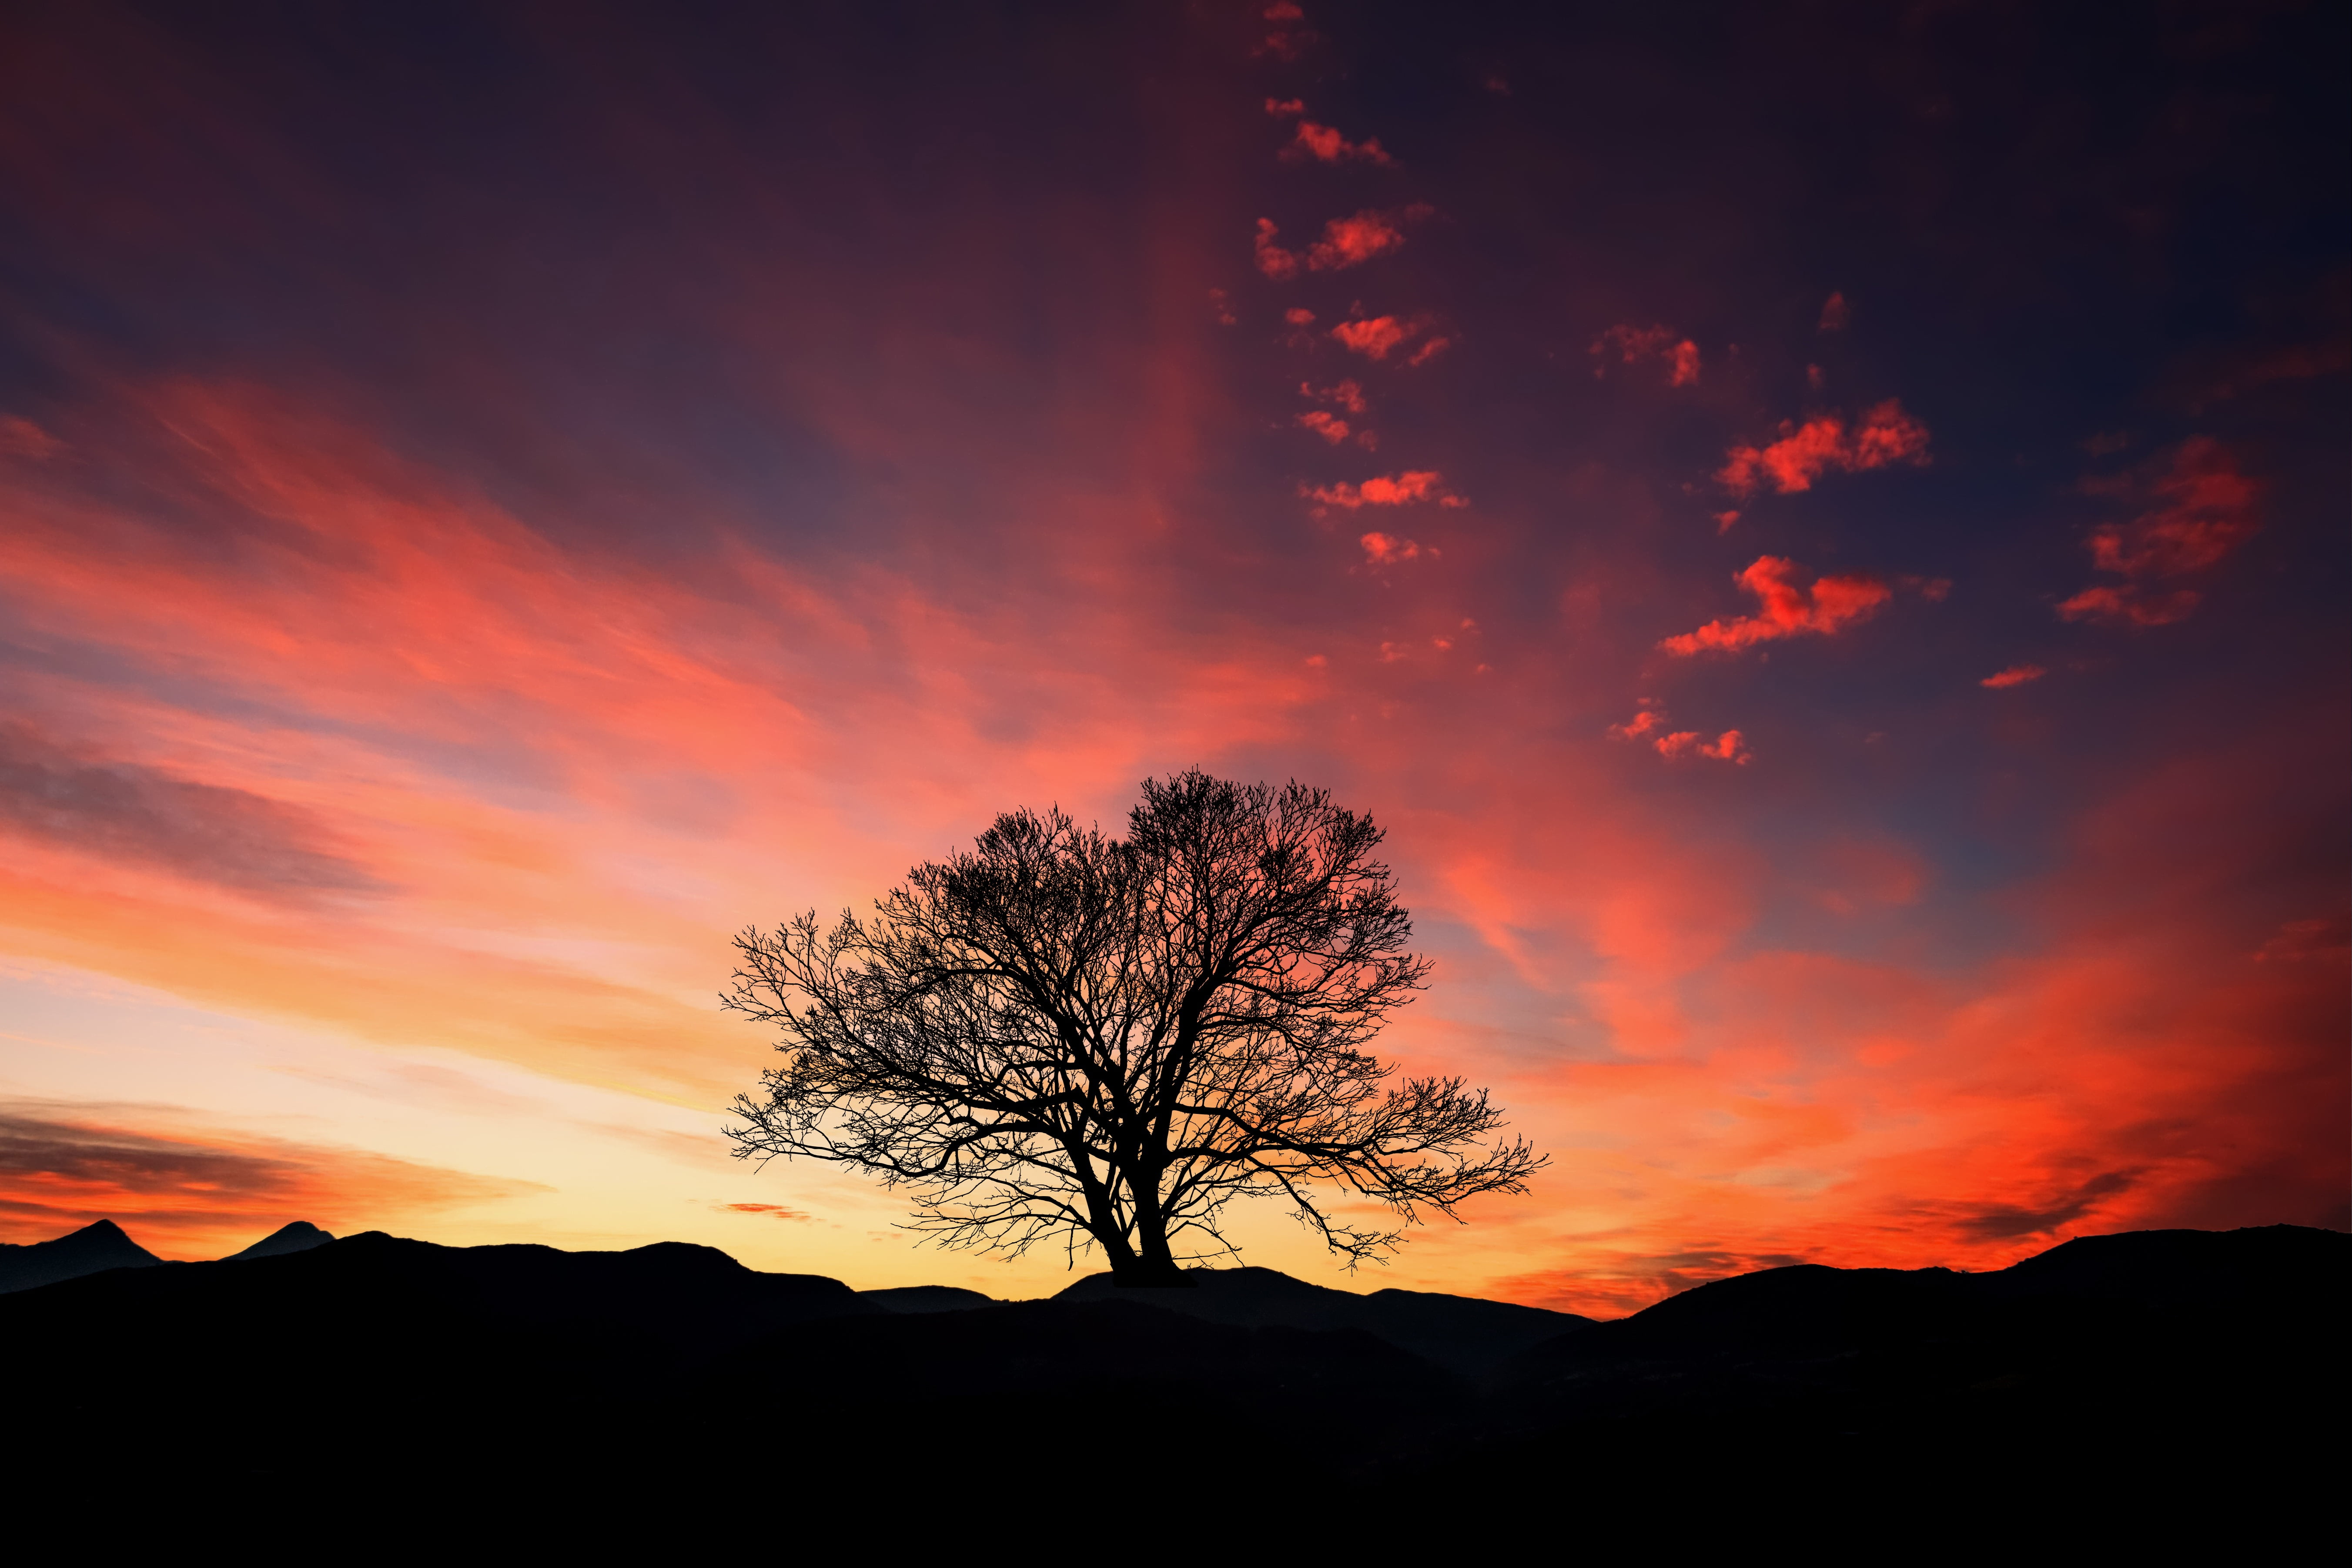 Wallpapers Of Sunsets Behind Trees » Arthatravel.com